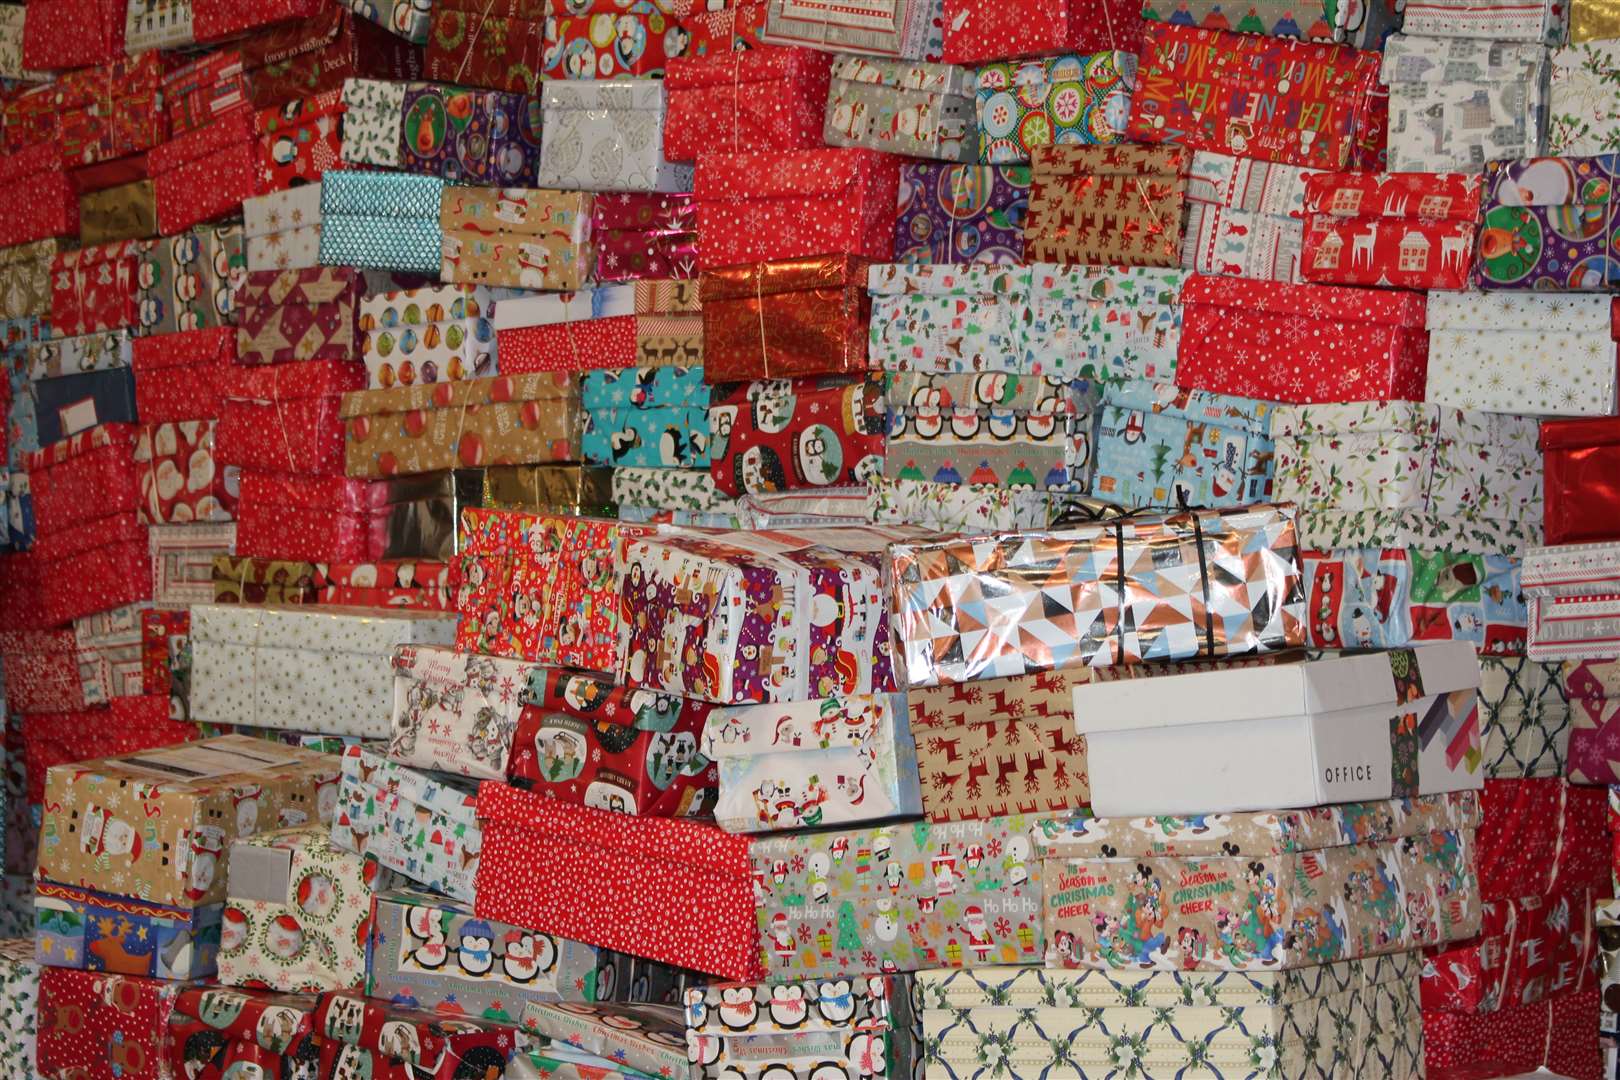 A colourful display of wrapped shoeboxes collected during last year's appeal.